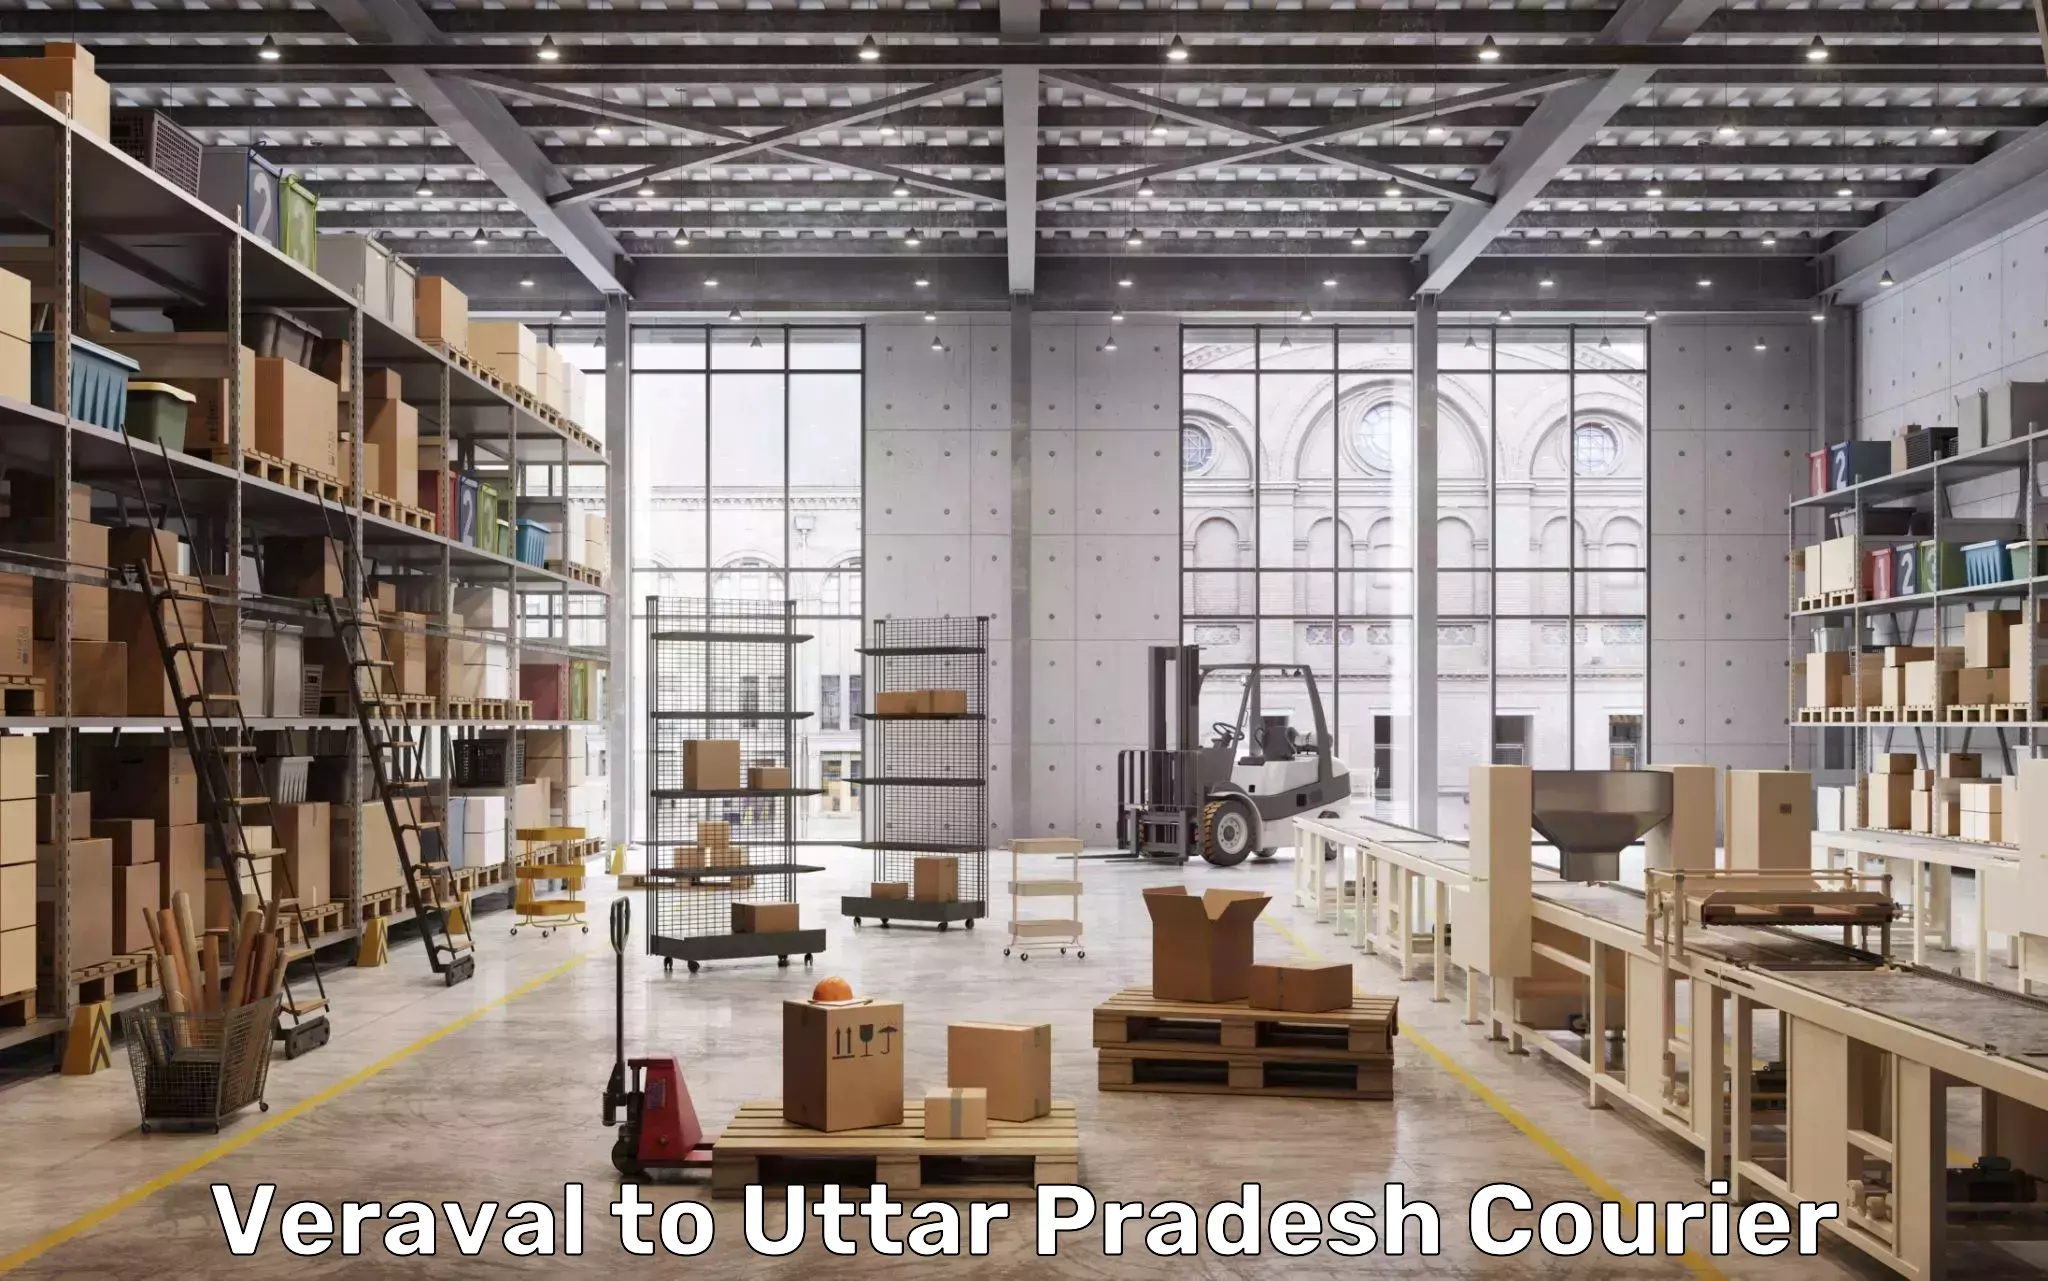 Baggage transport network Veraval to Sultanpur Avadh